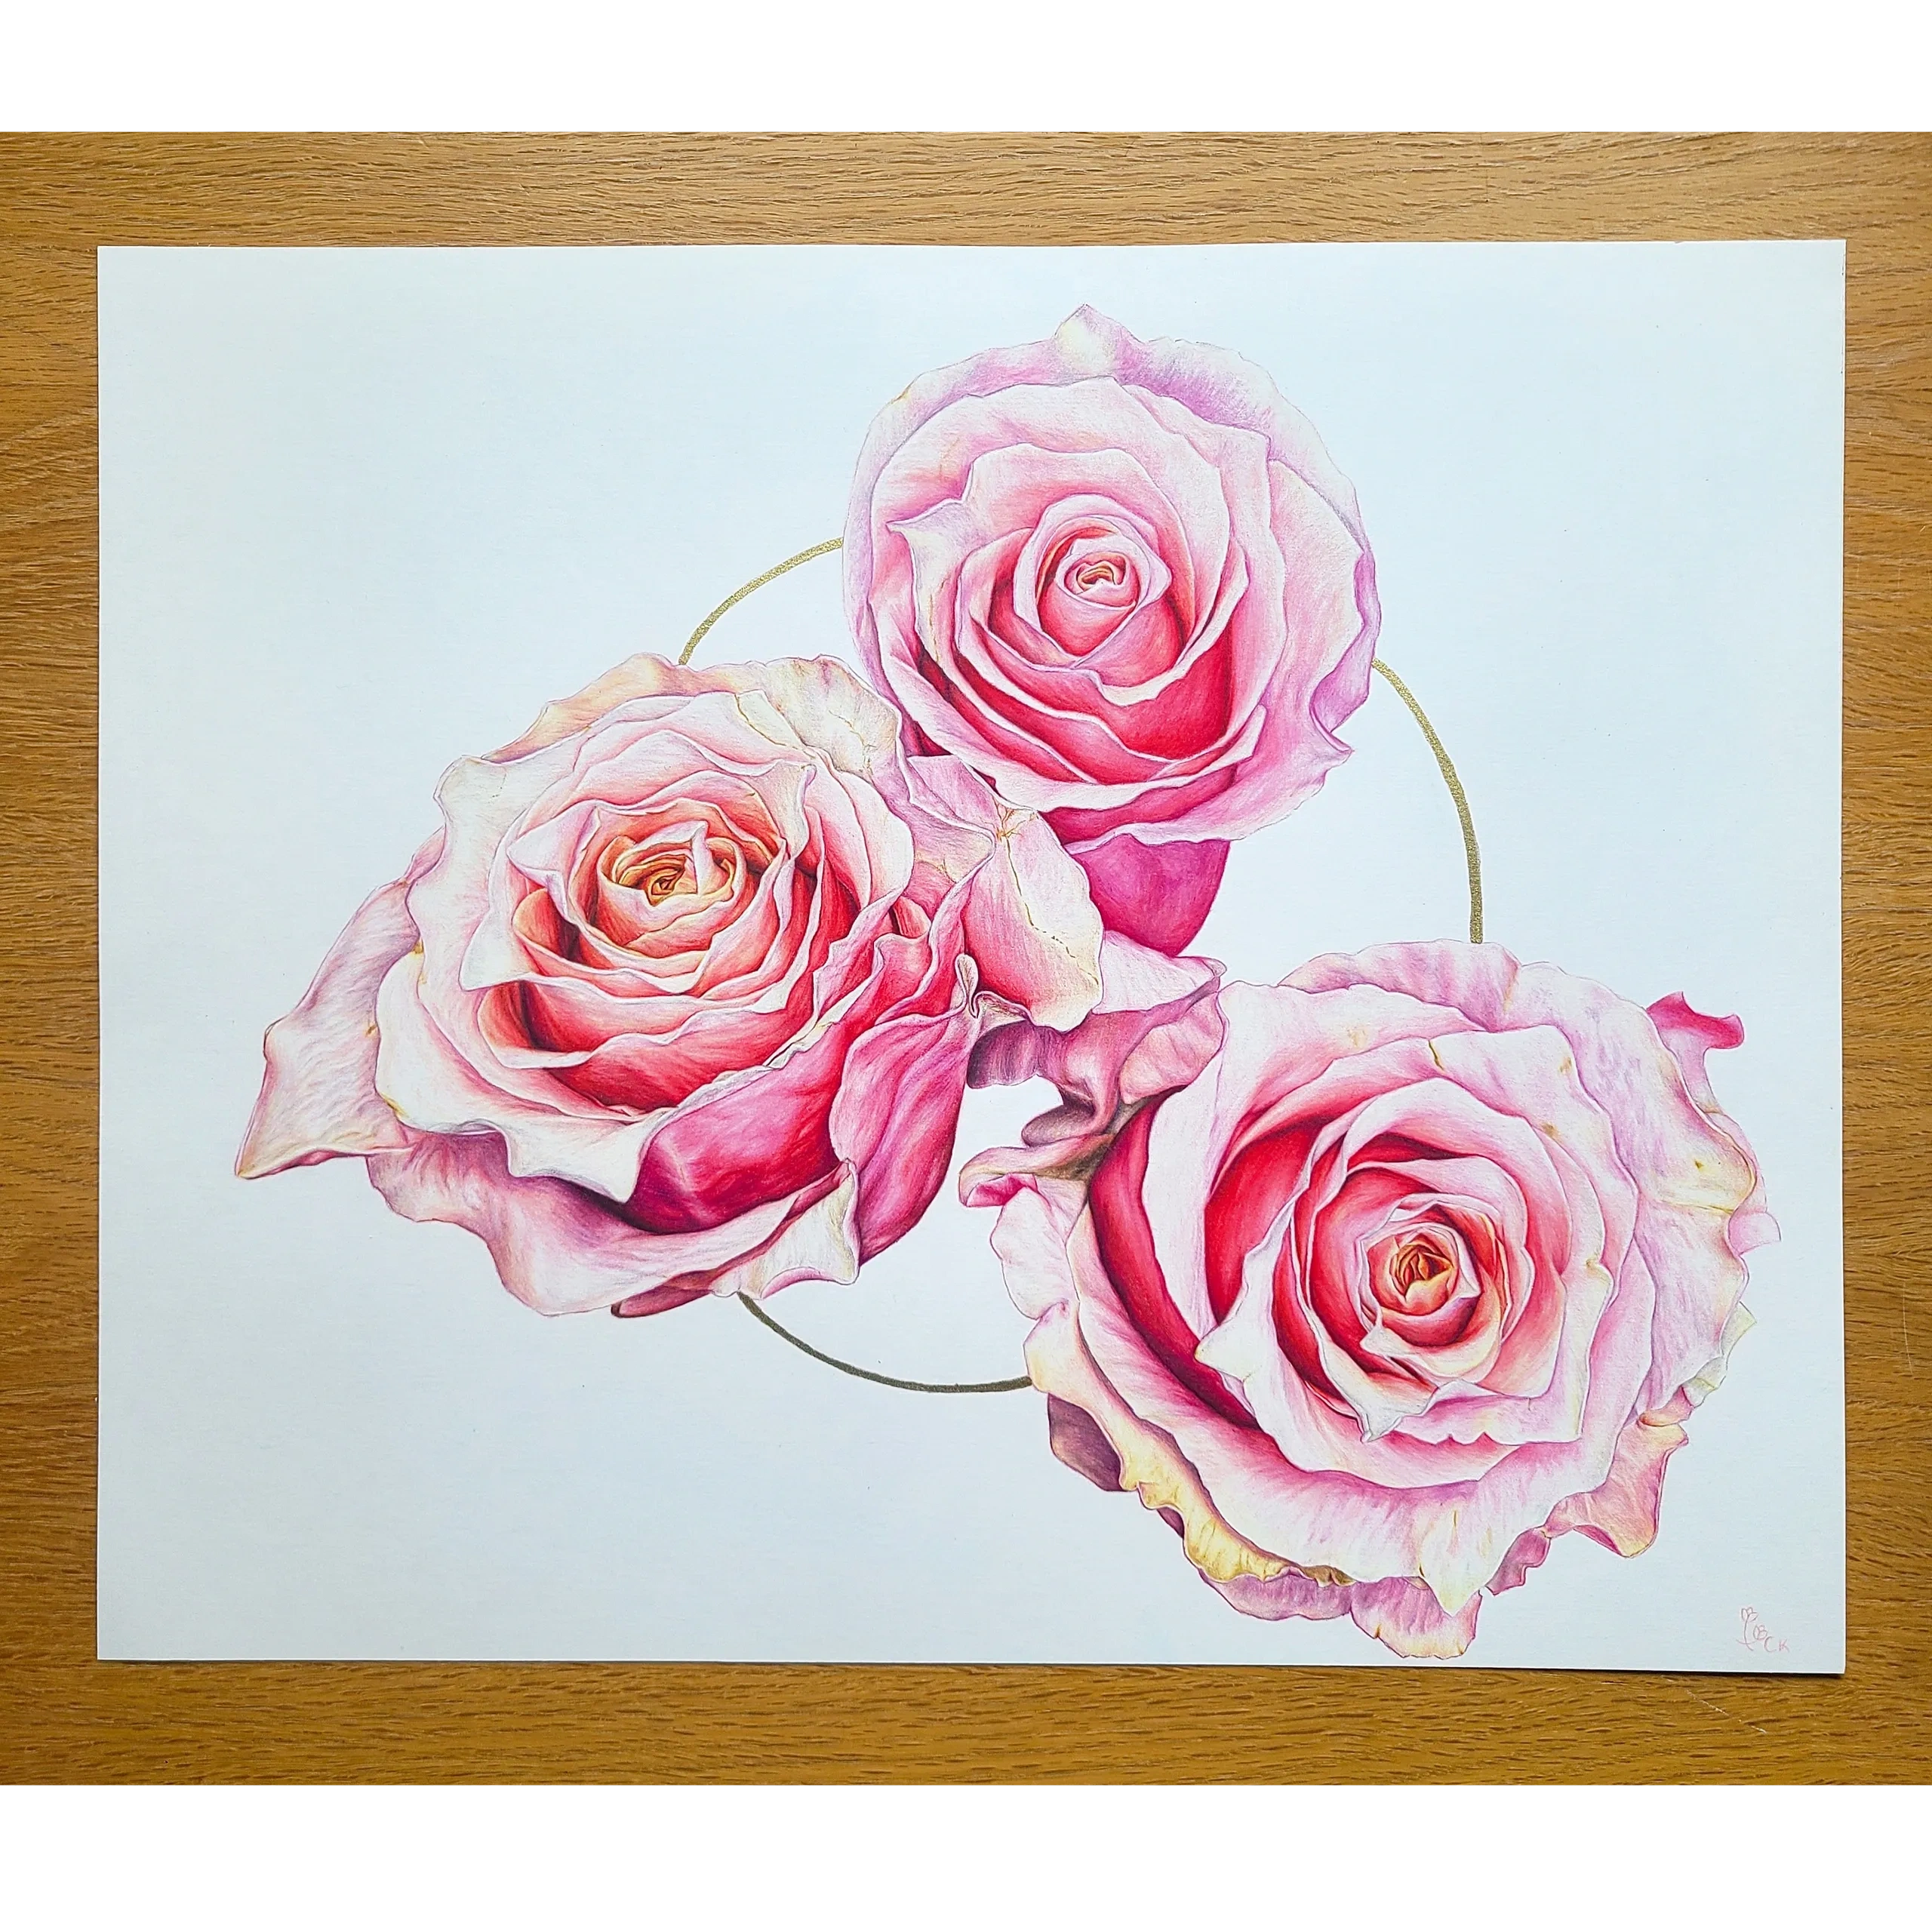 Three pink roses with a gold circle on a white background.